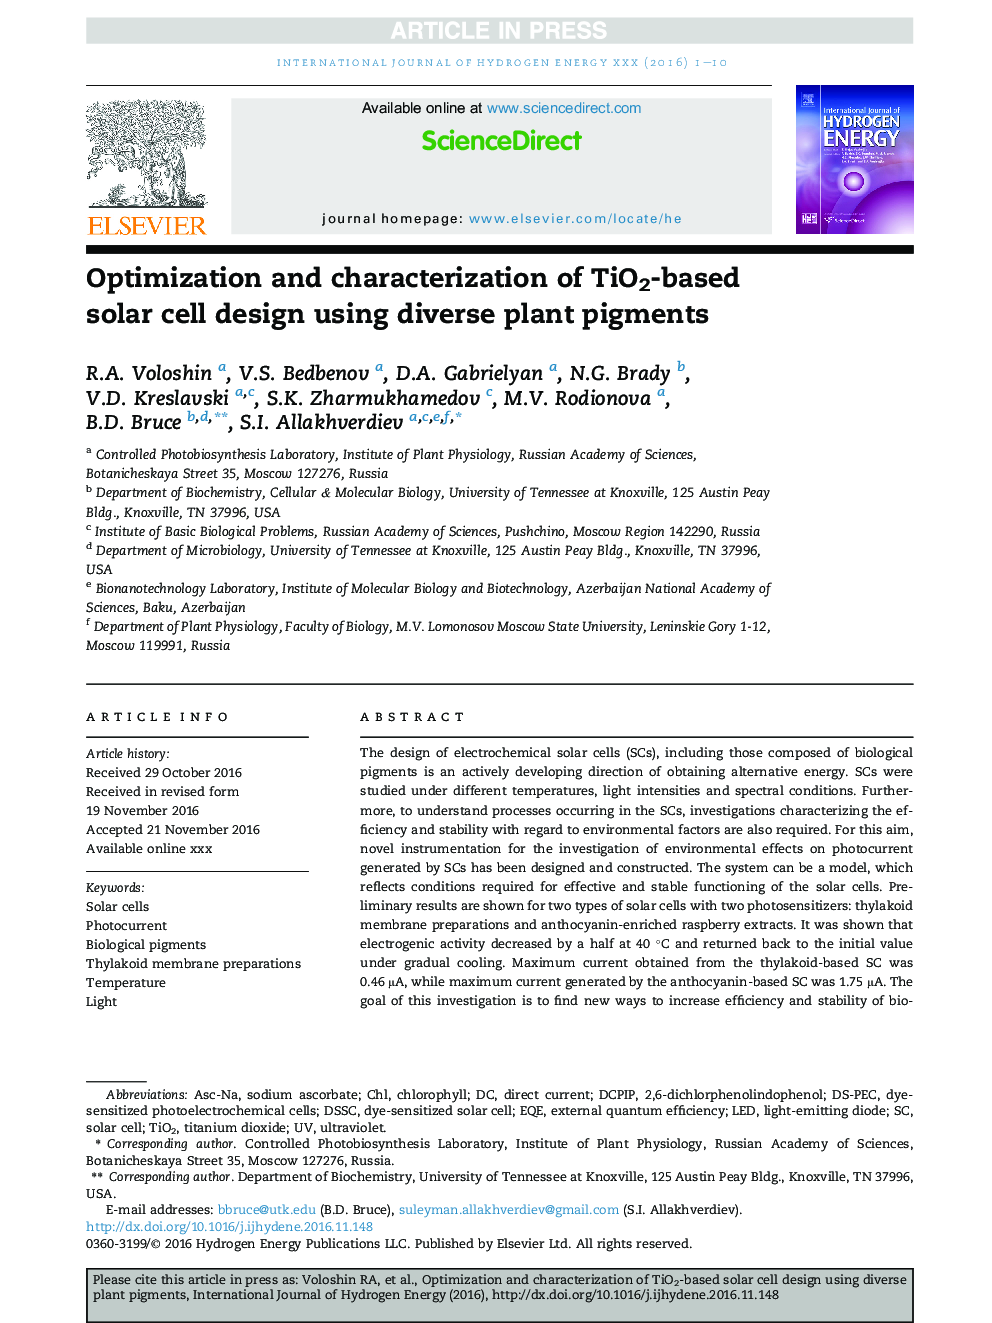 Optimization and characterization of TiO2-based solar cell design using diverse plant pigments